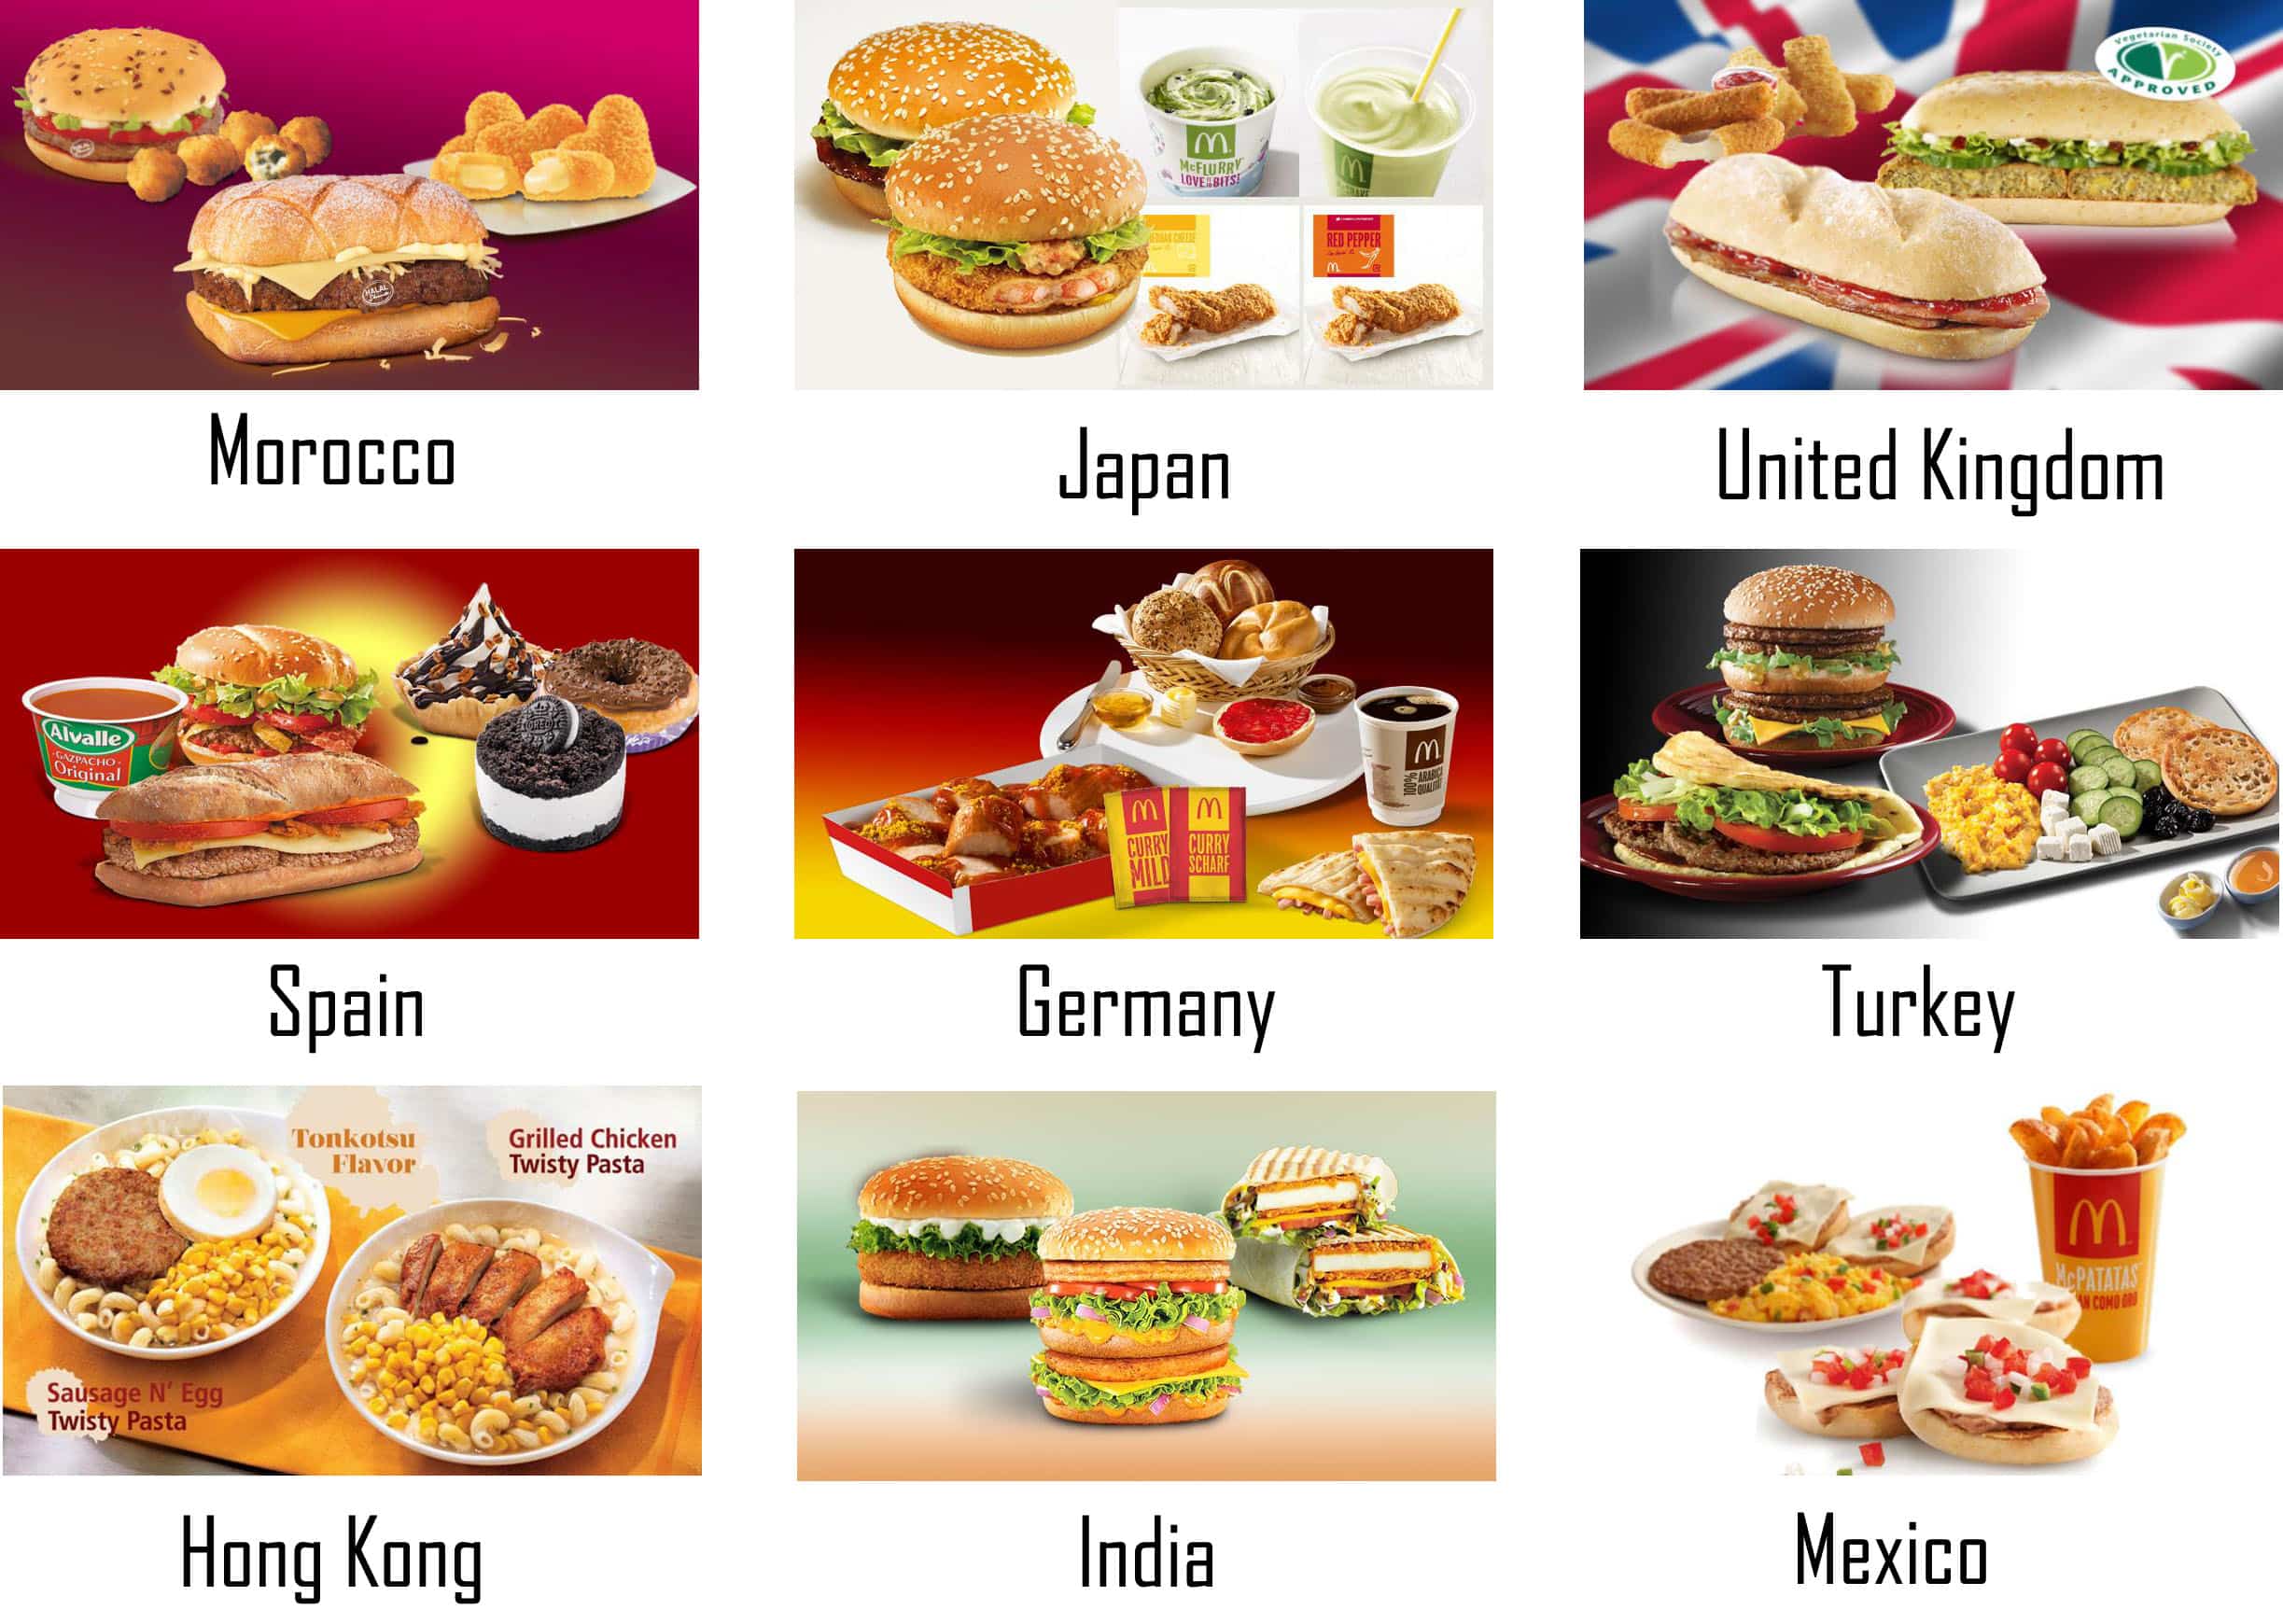 This is the Mcdonald's products from different countries and as you can see, McDonald's uses geographic marketing and uses th